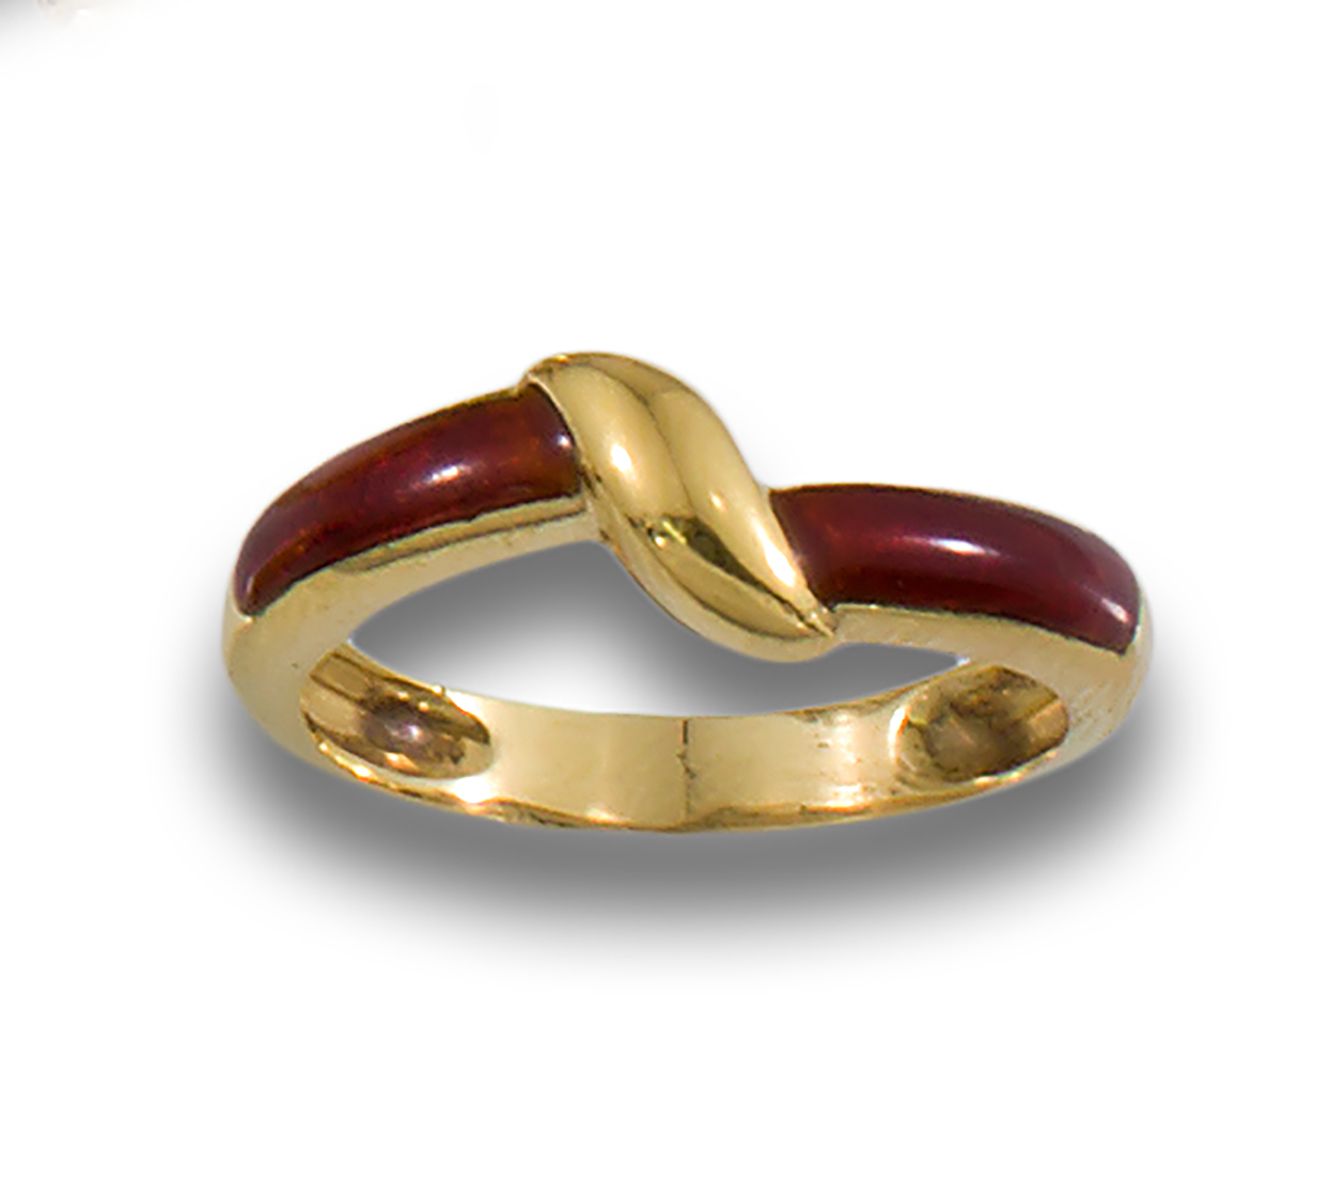 GOLD RING WITH BURGUNDY ENAMEL ARMS 18kt yellow gold ring, arm with fine burgund&hellip;